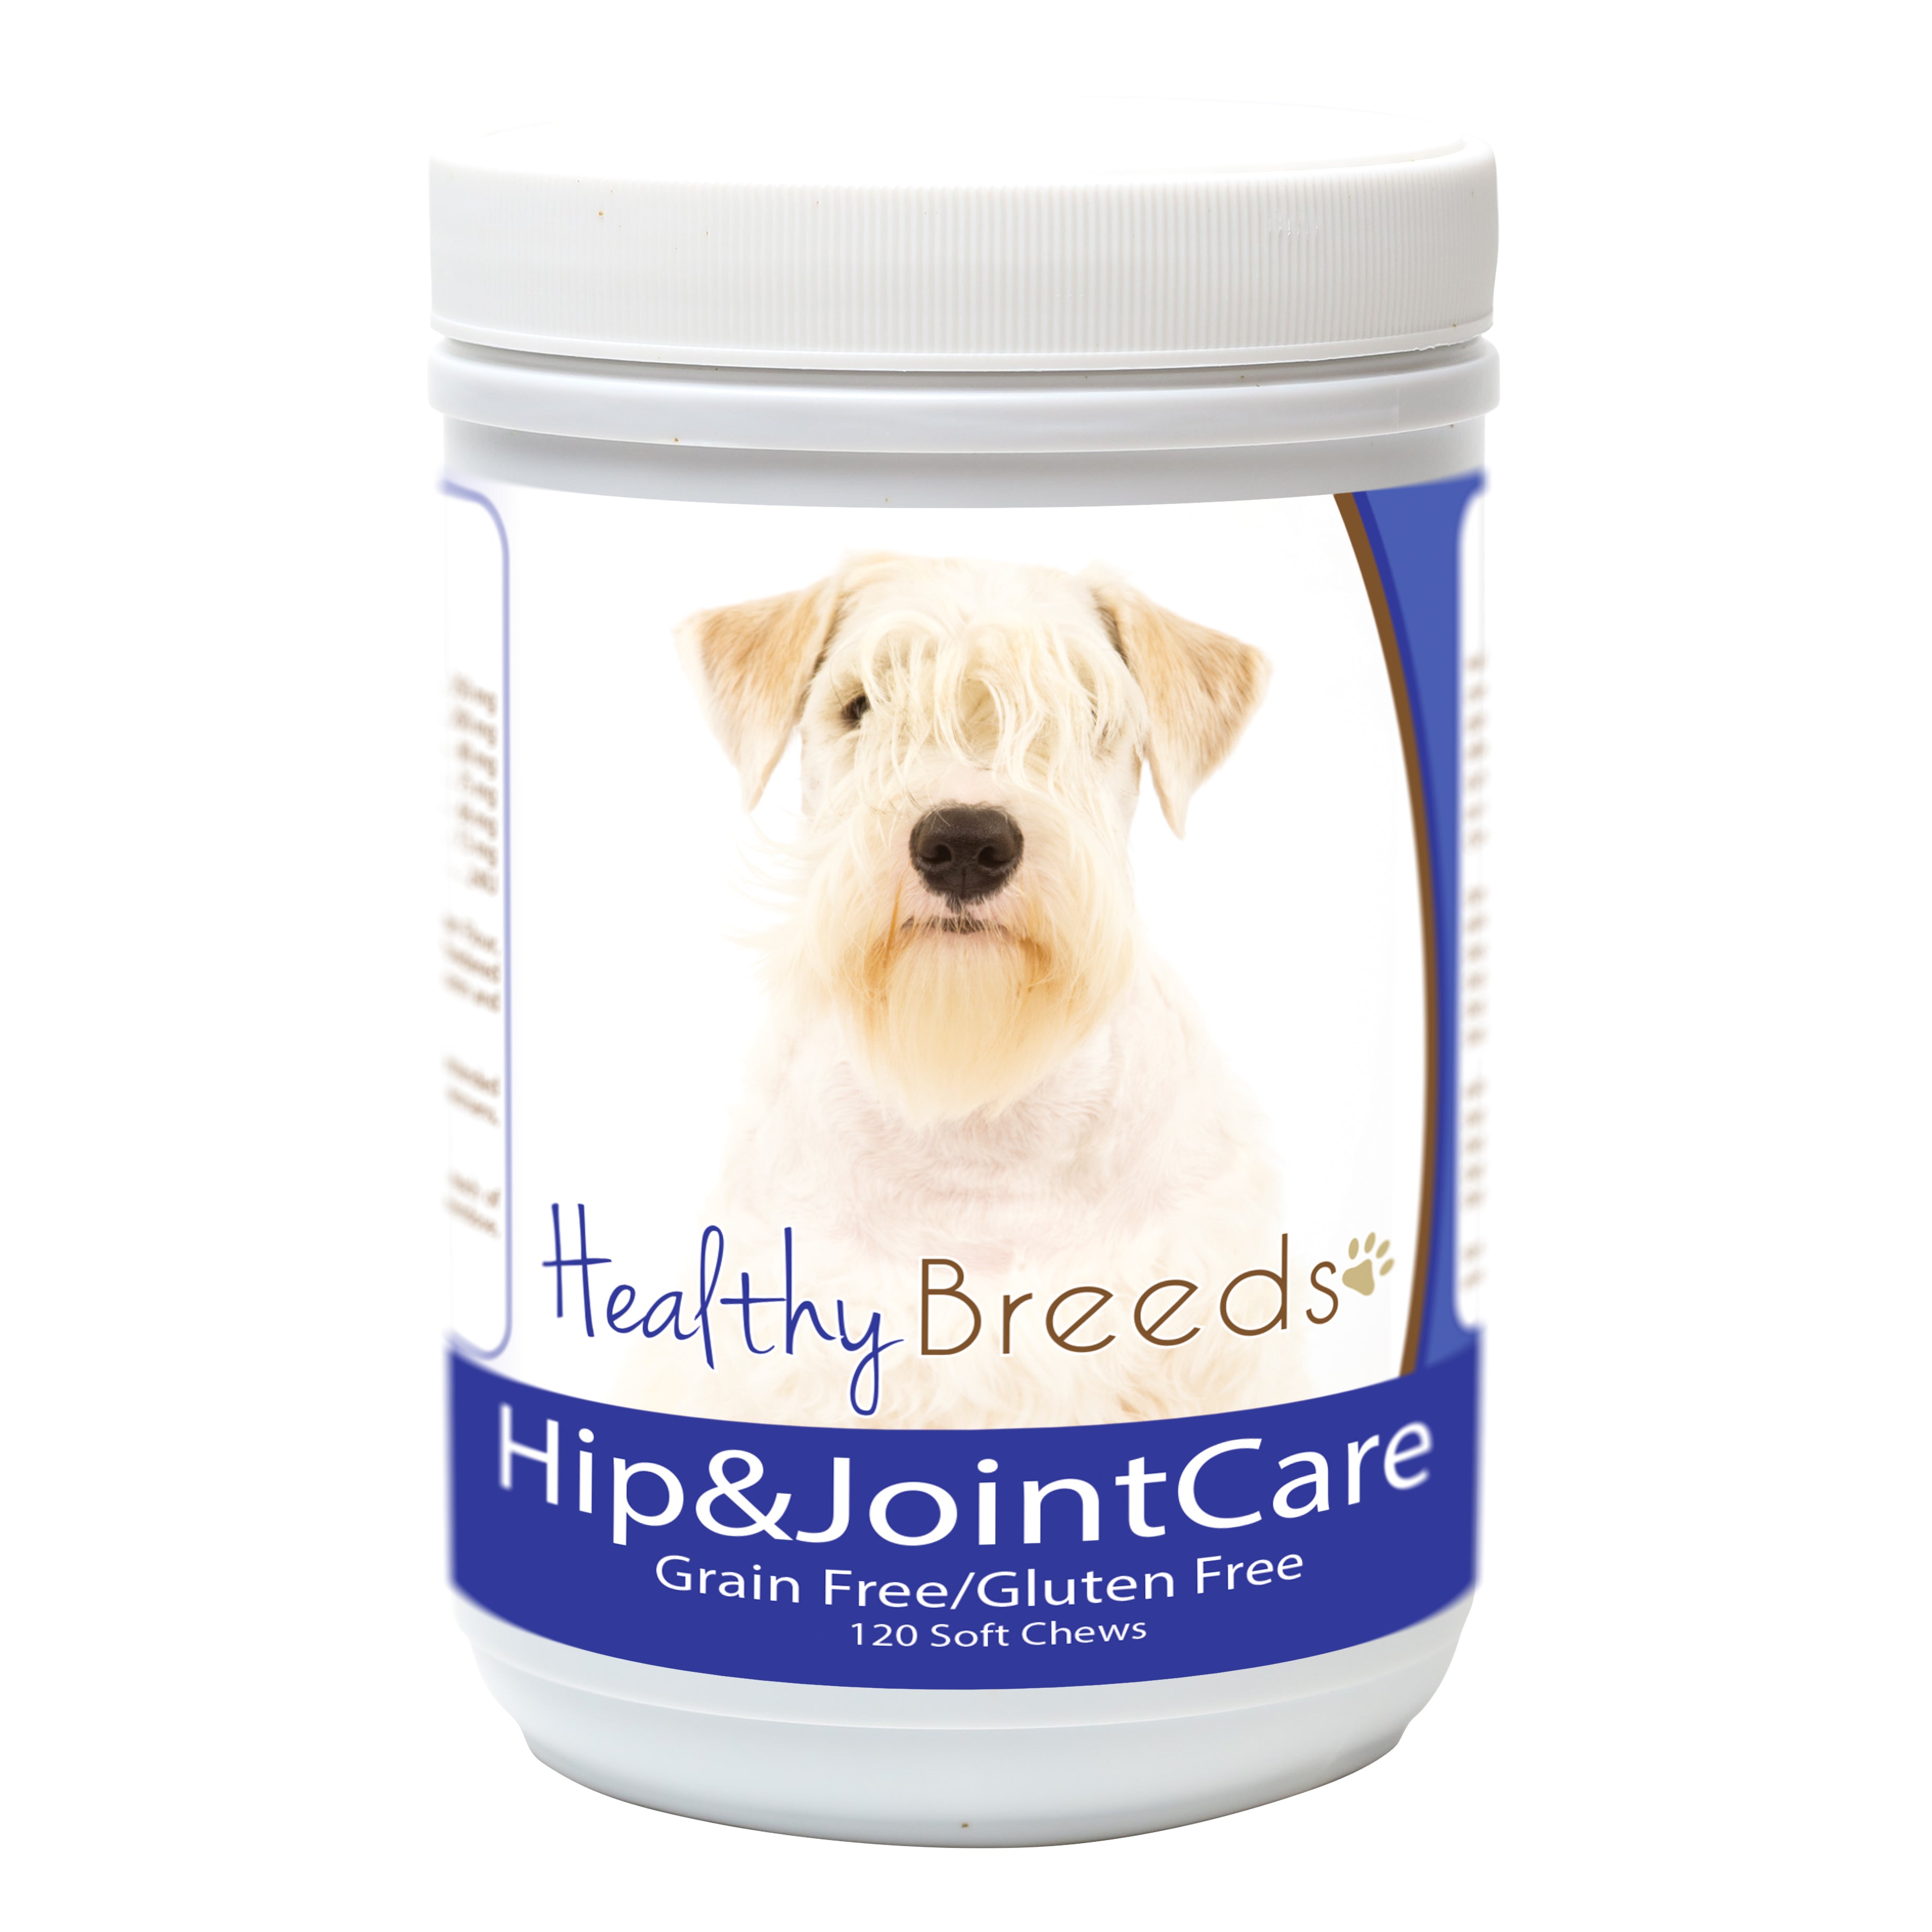 Sealyham Terrier Hip and Joint Care 120 Count